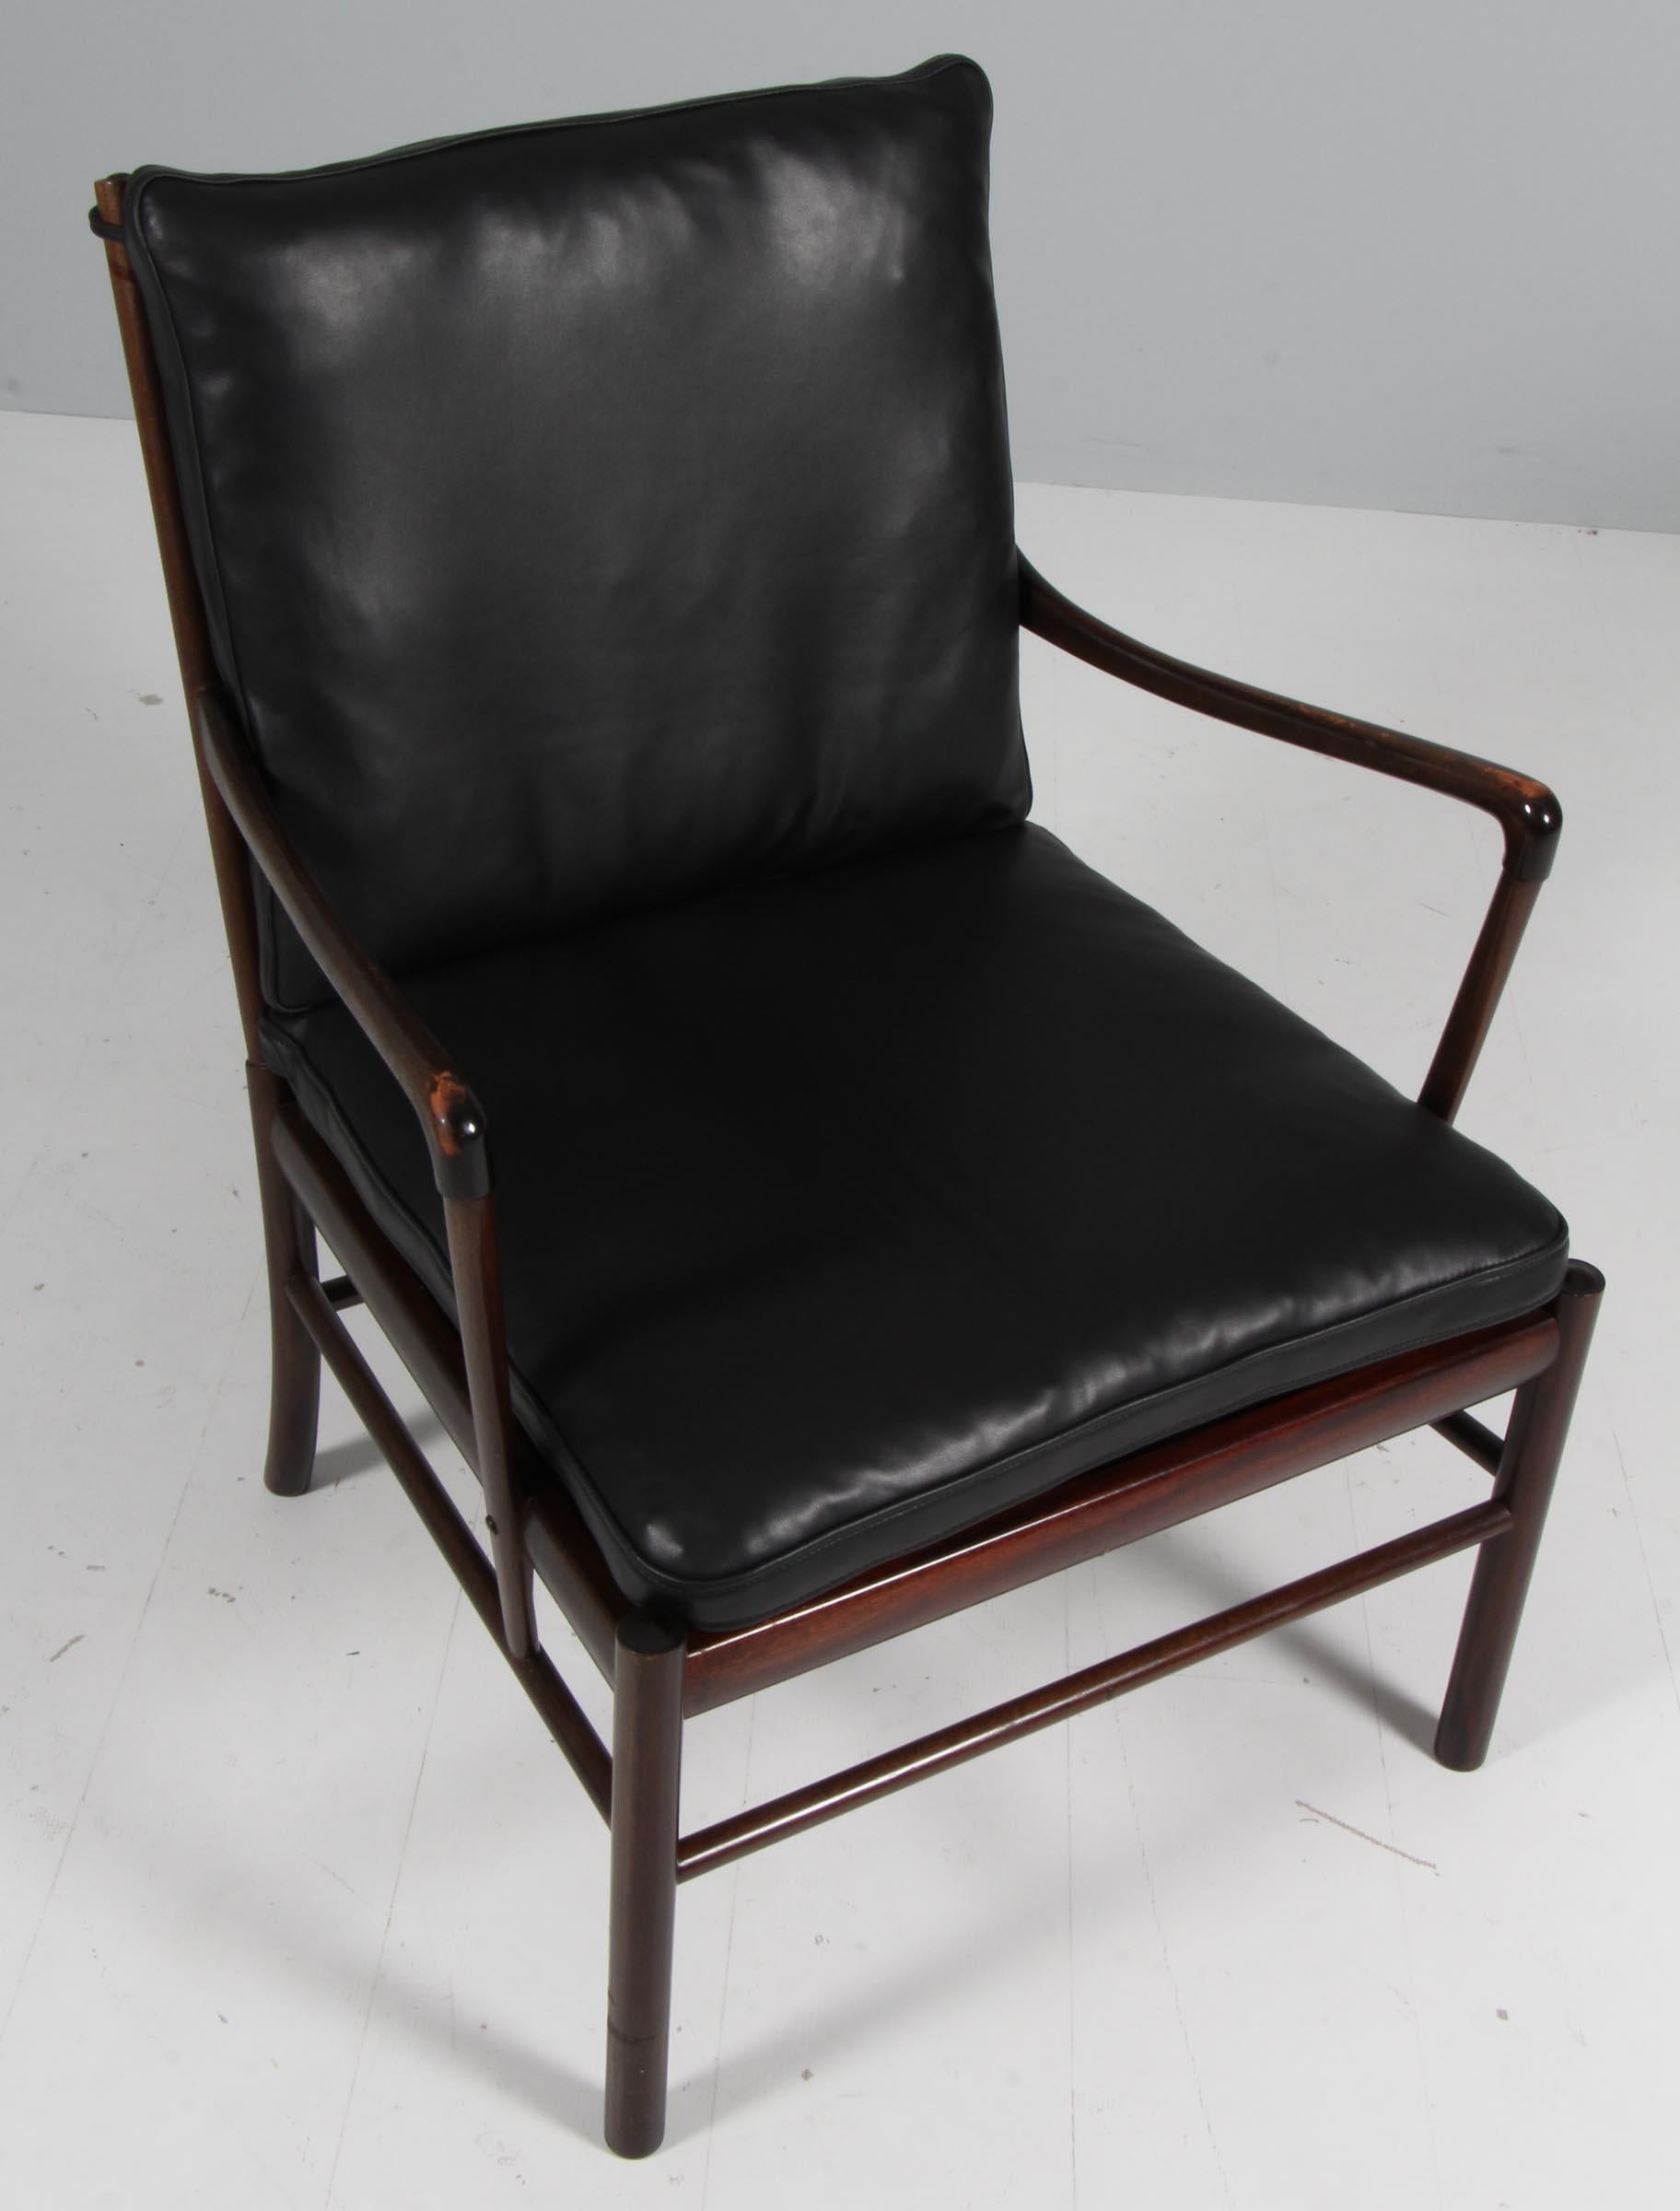 Ole Wanscher lounge chair new upholstered with black aniline leather.

Made in laquered mahogany. 

Model colonial chair, made by Poul Jeppesen.